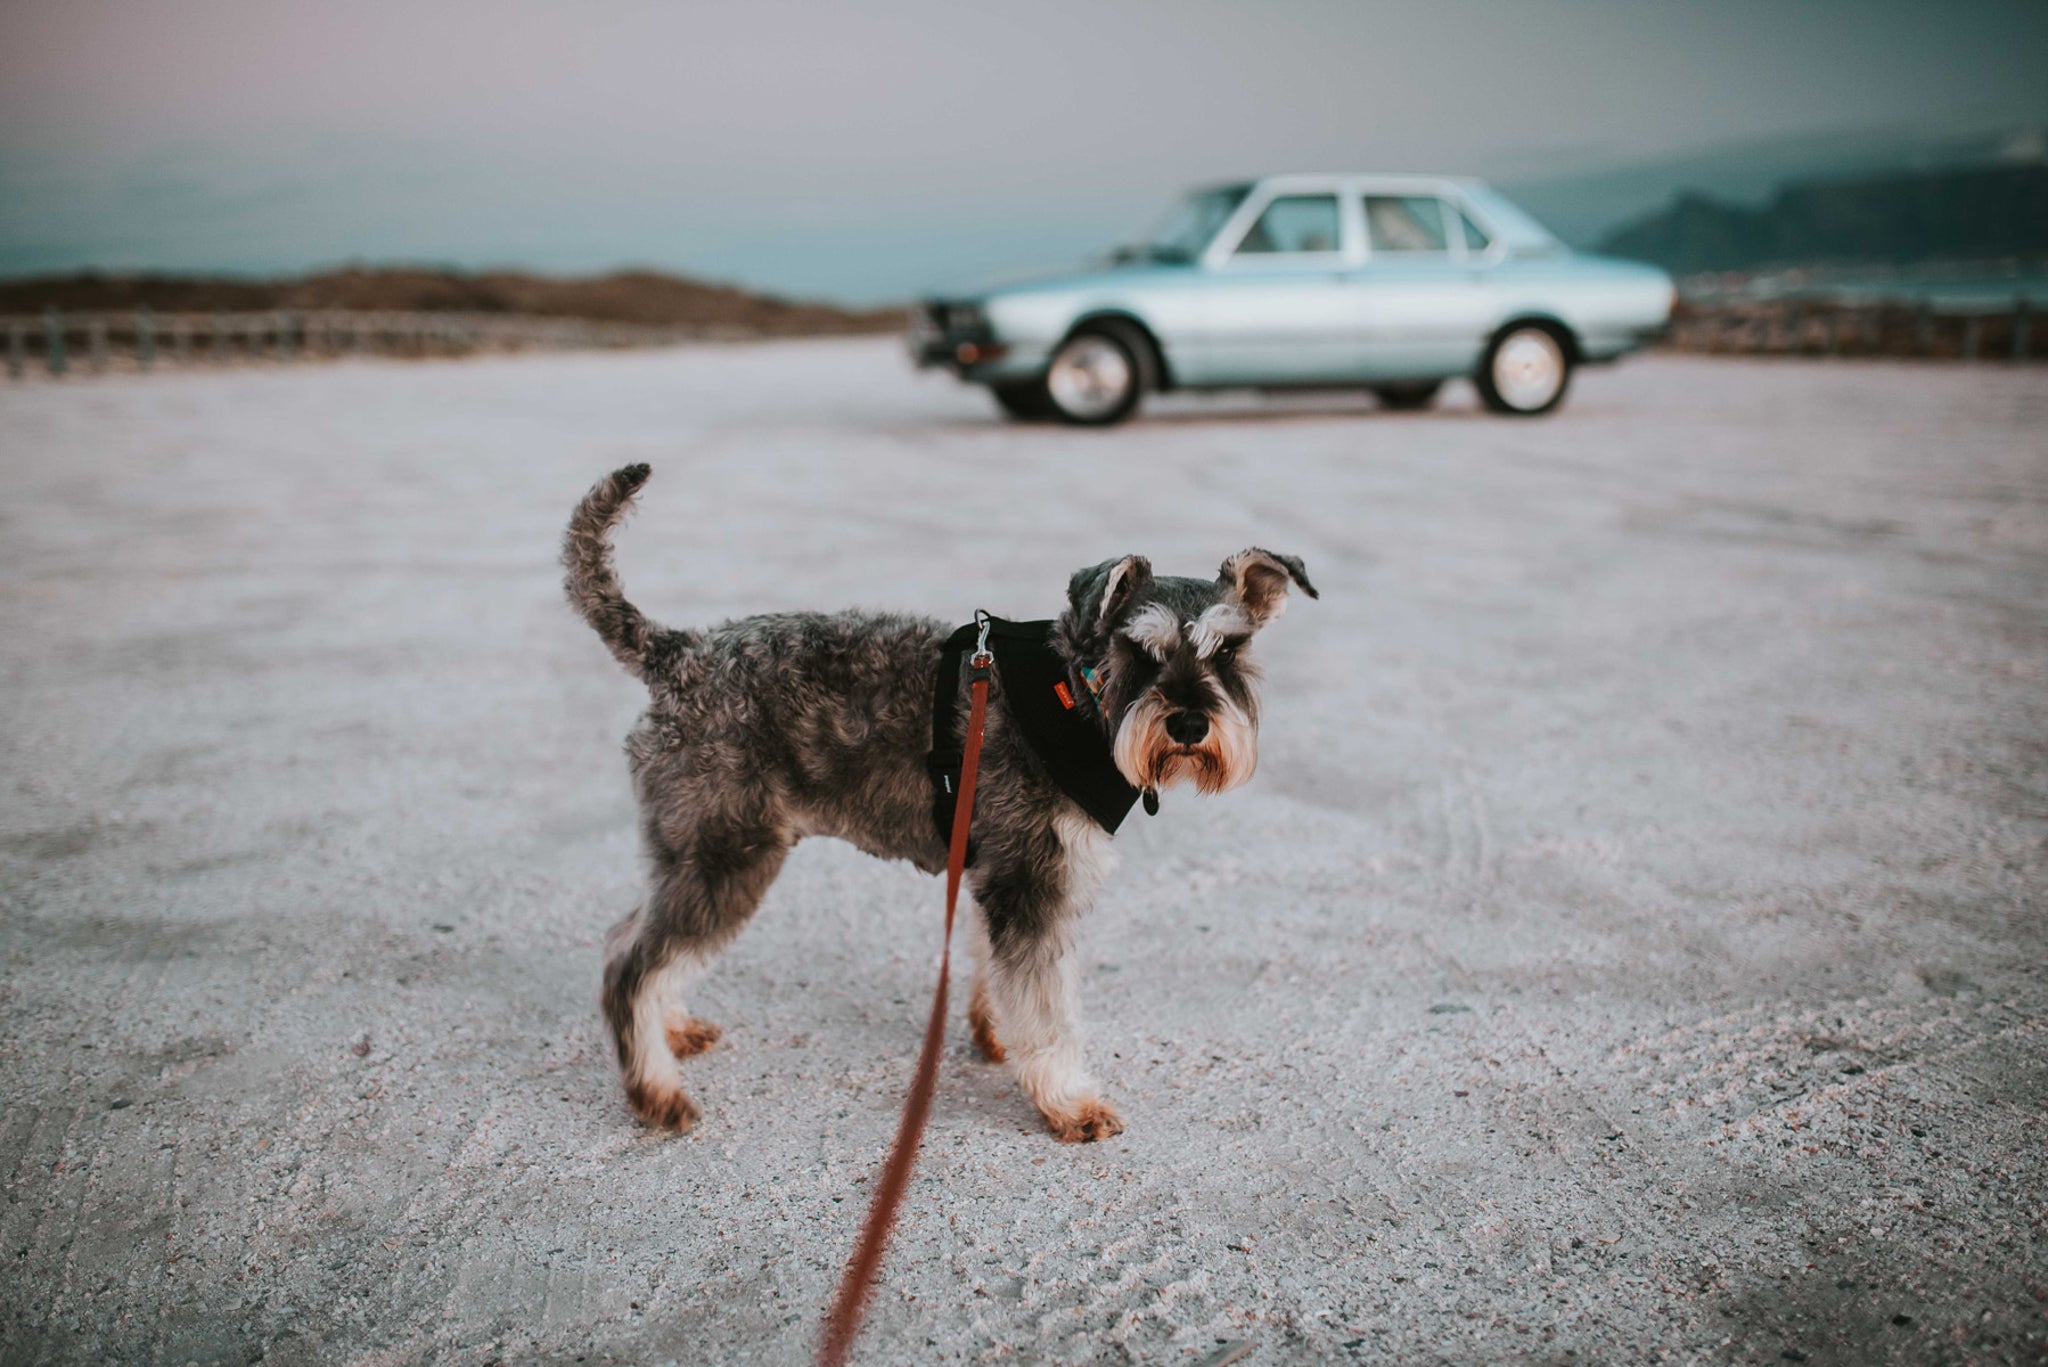 138_black_and_white_dog_on_red_leash_in_dirt_with_blue_car_behind.jpg